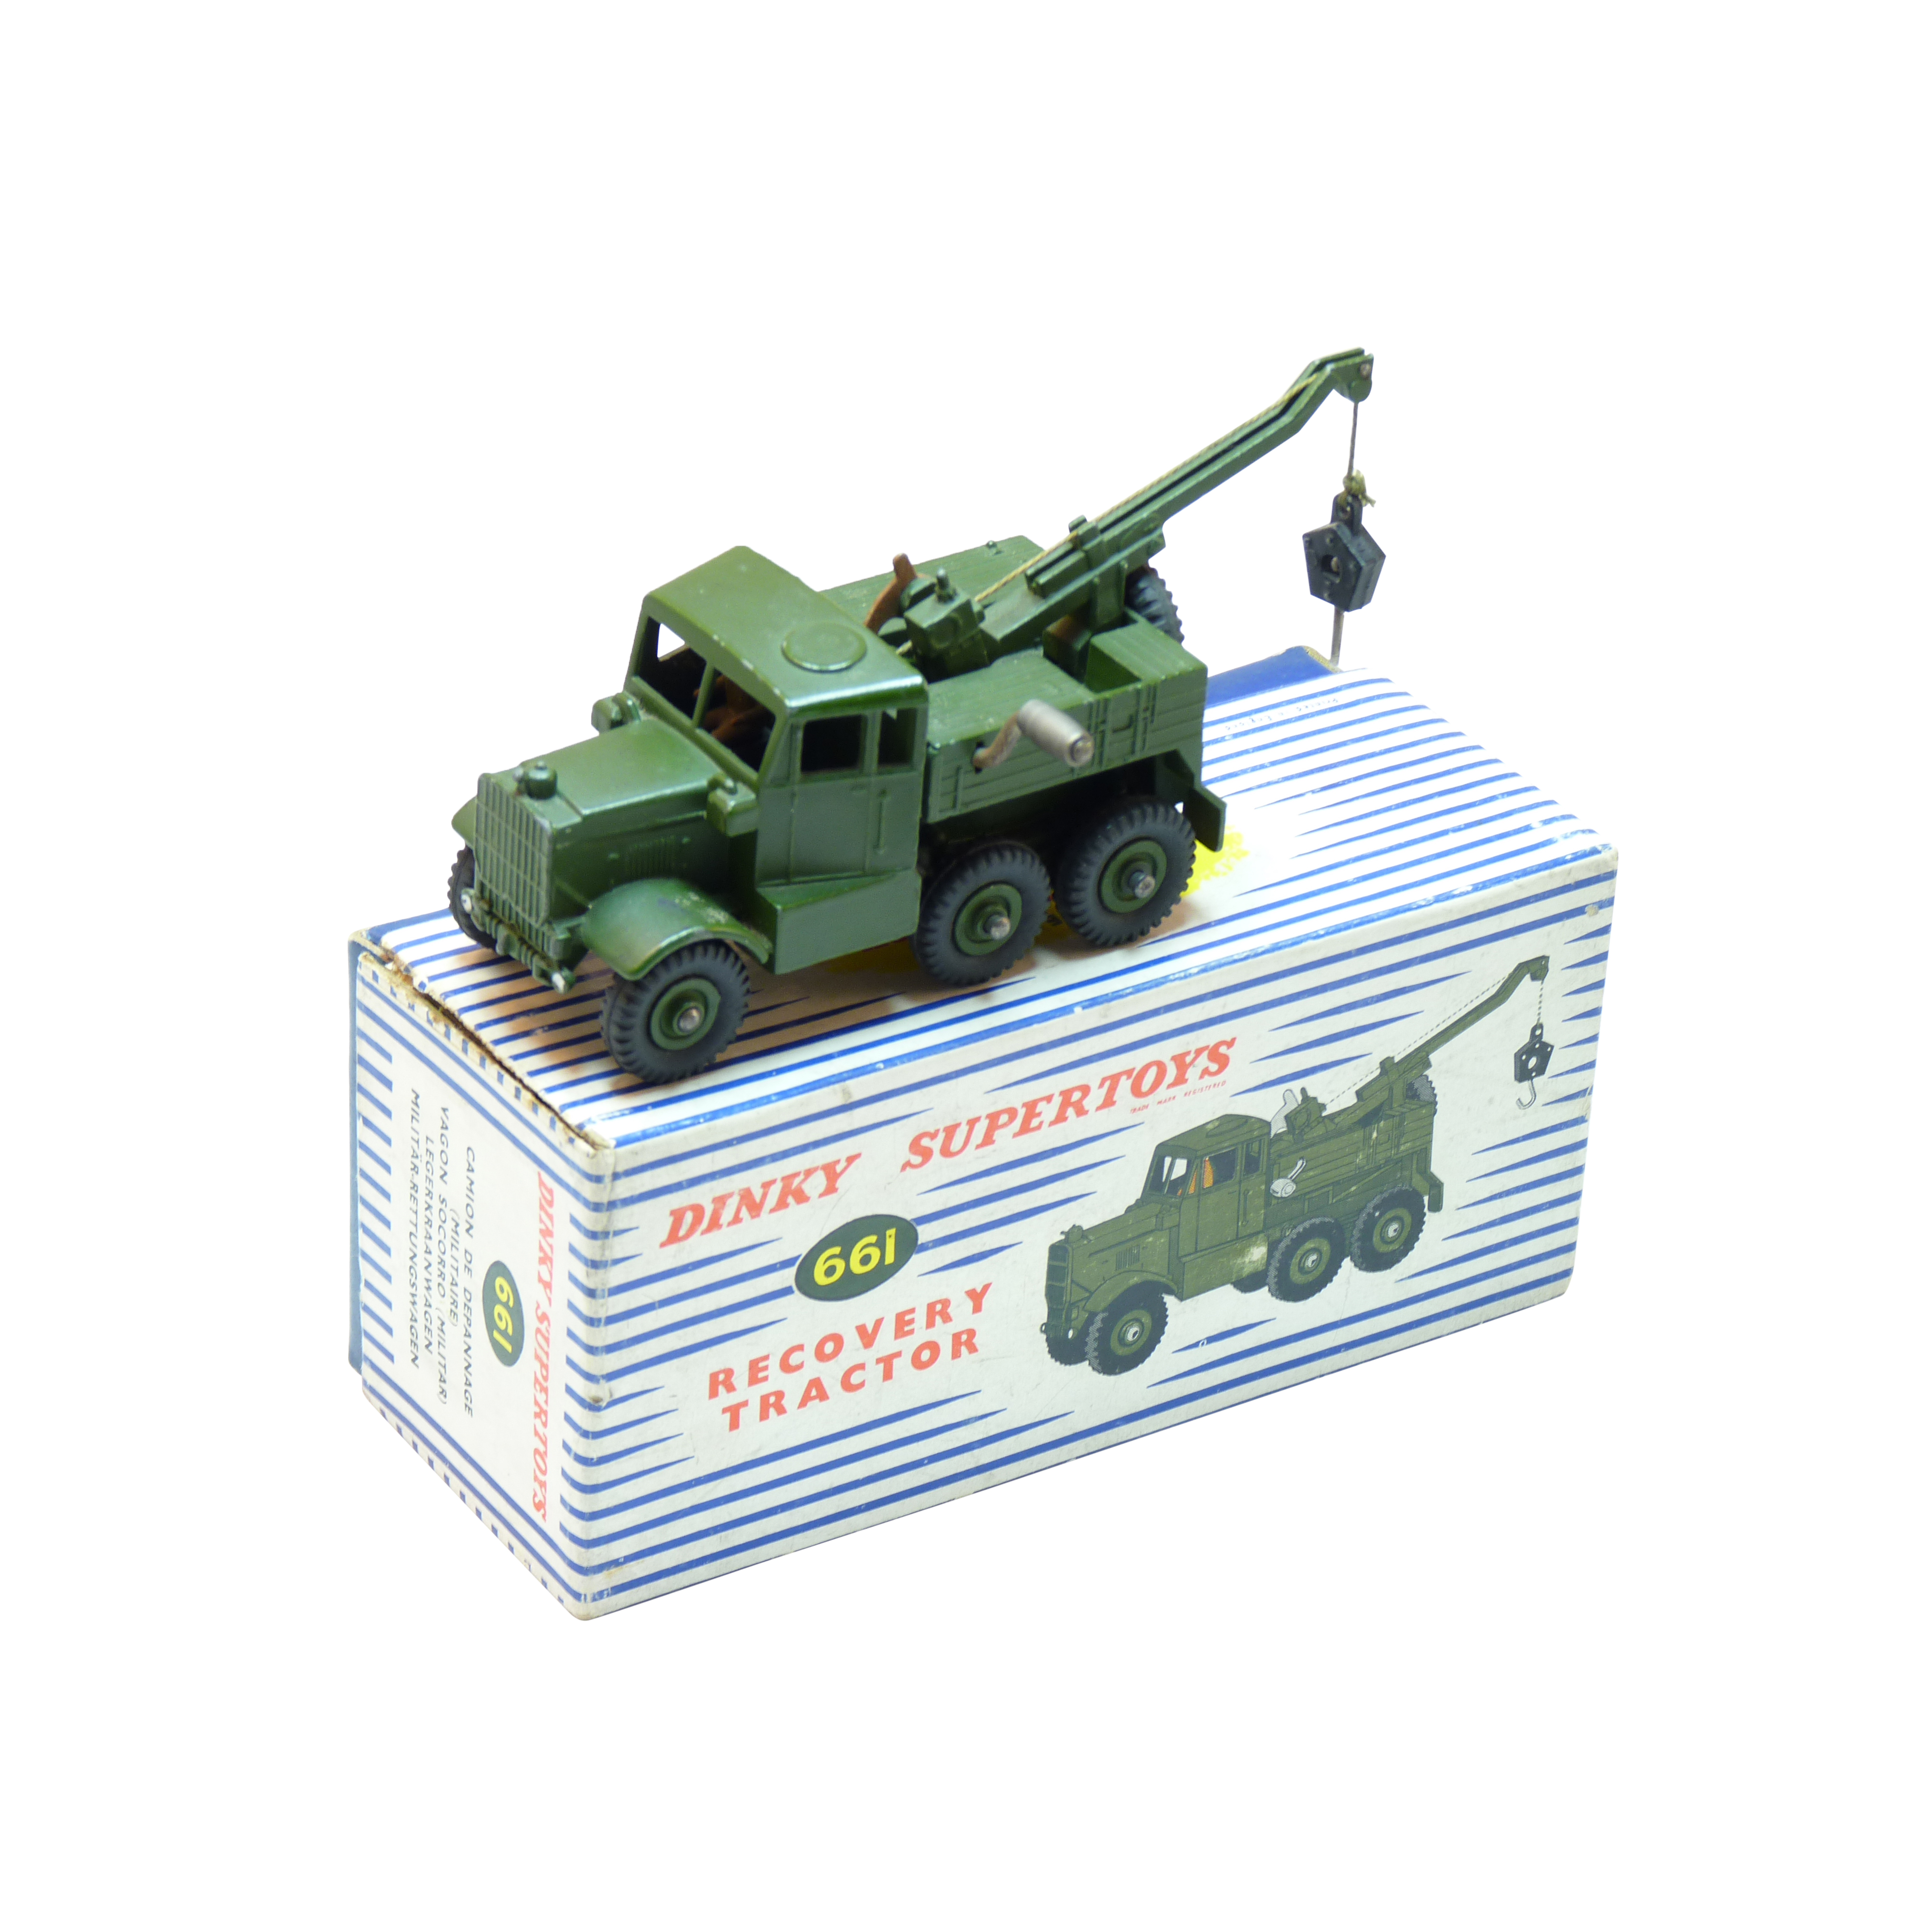 15 military antennas for solido-dinky toys 